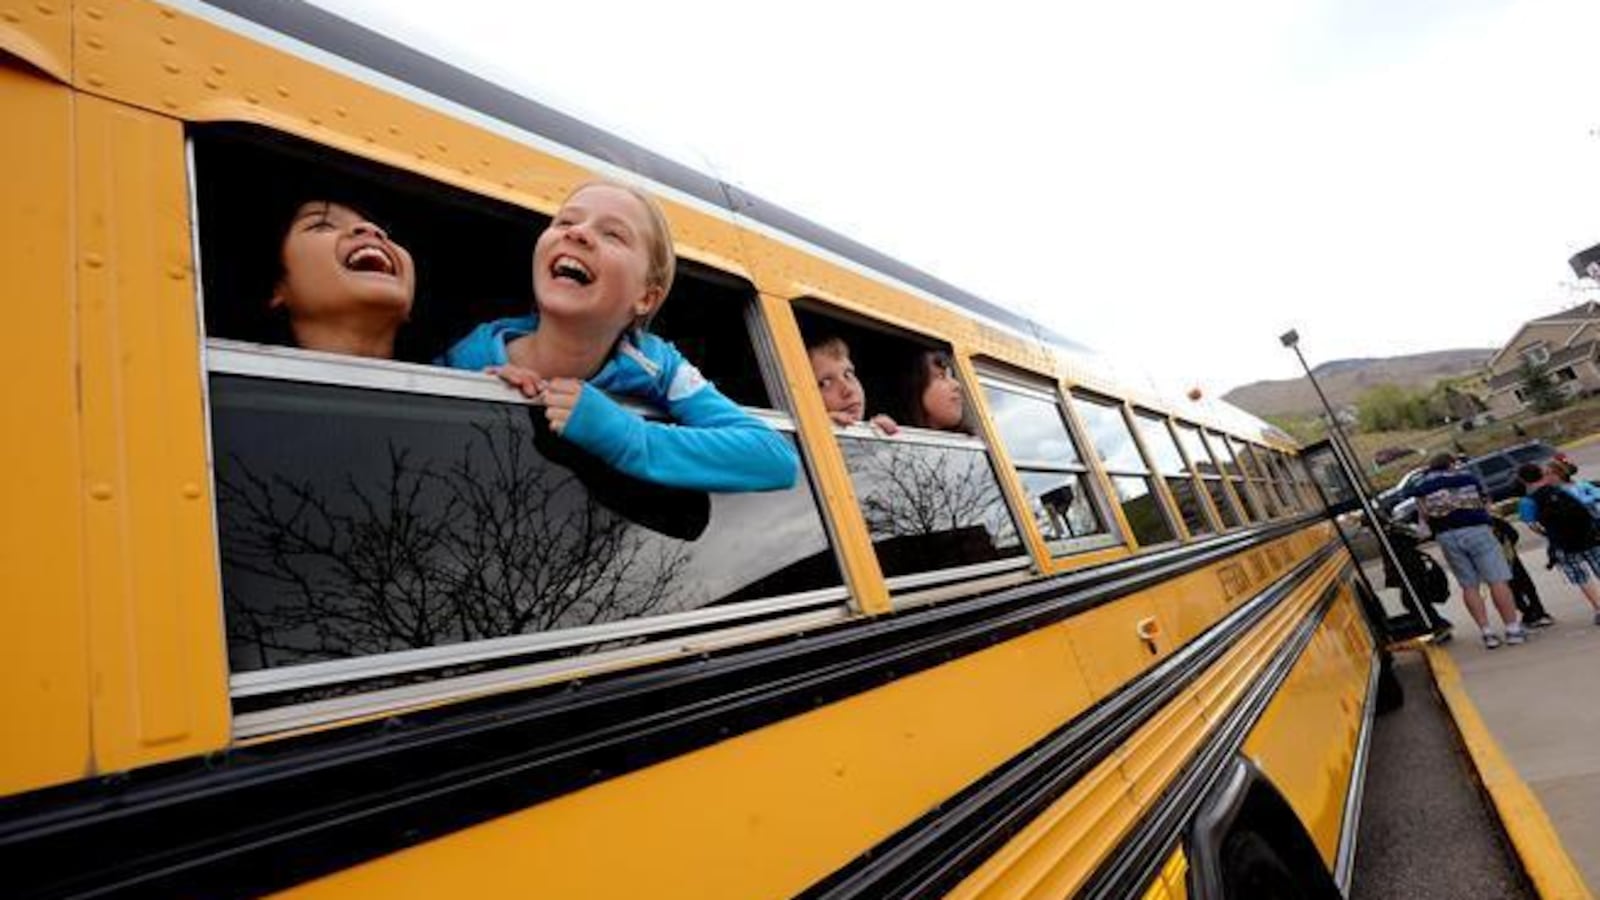 Fourth-graders Kintan Surghani, left, and Rachel Anderson laugh out the school bus window at Mitchell Elementary School in Golden.